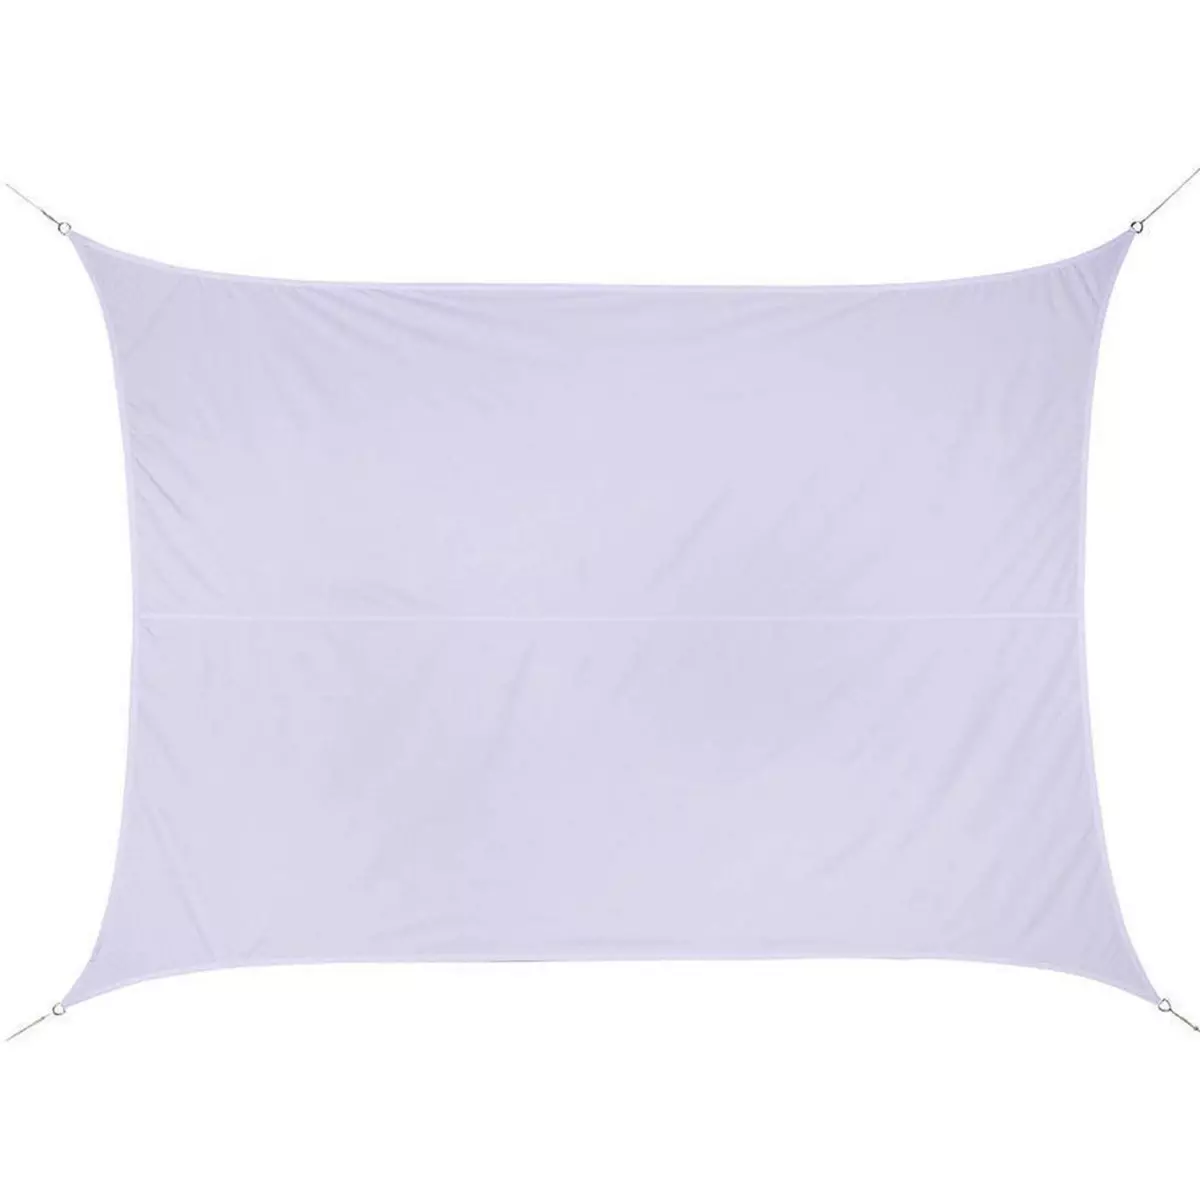 HESPERIDE Voile d'ombrage rectangulaire 3 x 4 m - Curacao - Blanc